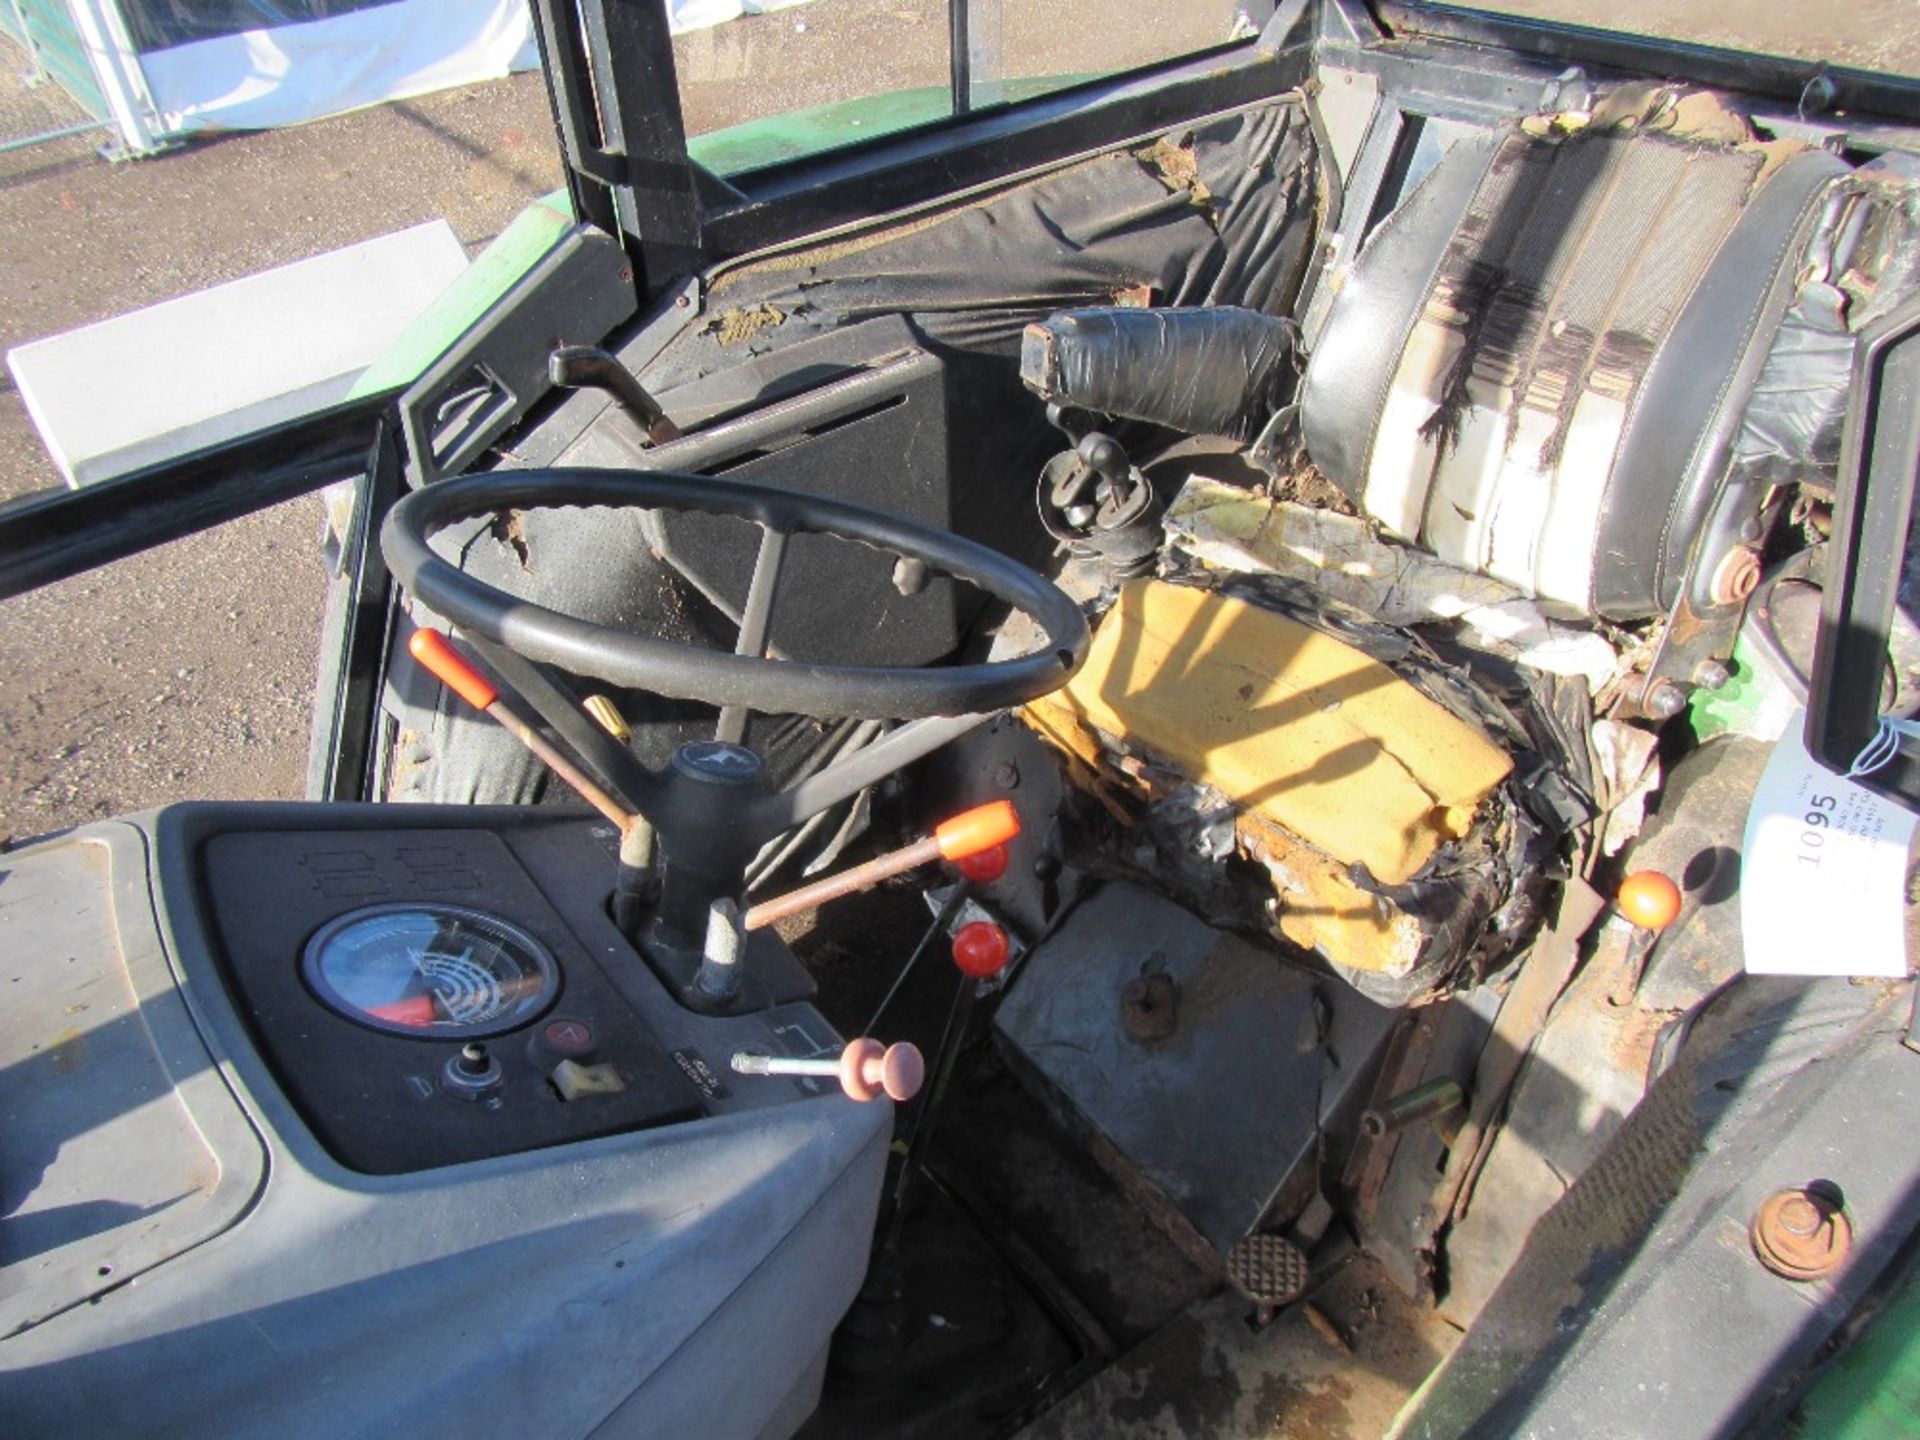 John Deere 3040 2wd Tractor with OPU Cab Reg. No. TFM 461V Ser No 364600 UNRESERVED LOT - Image 12 of 16